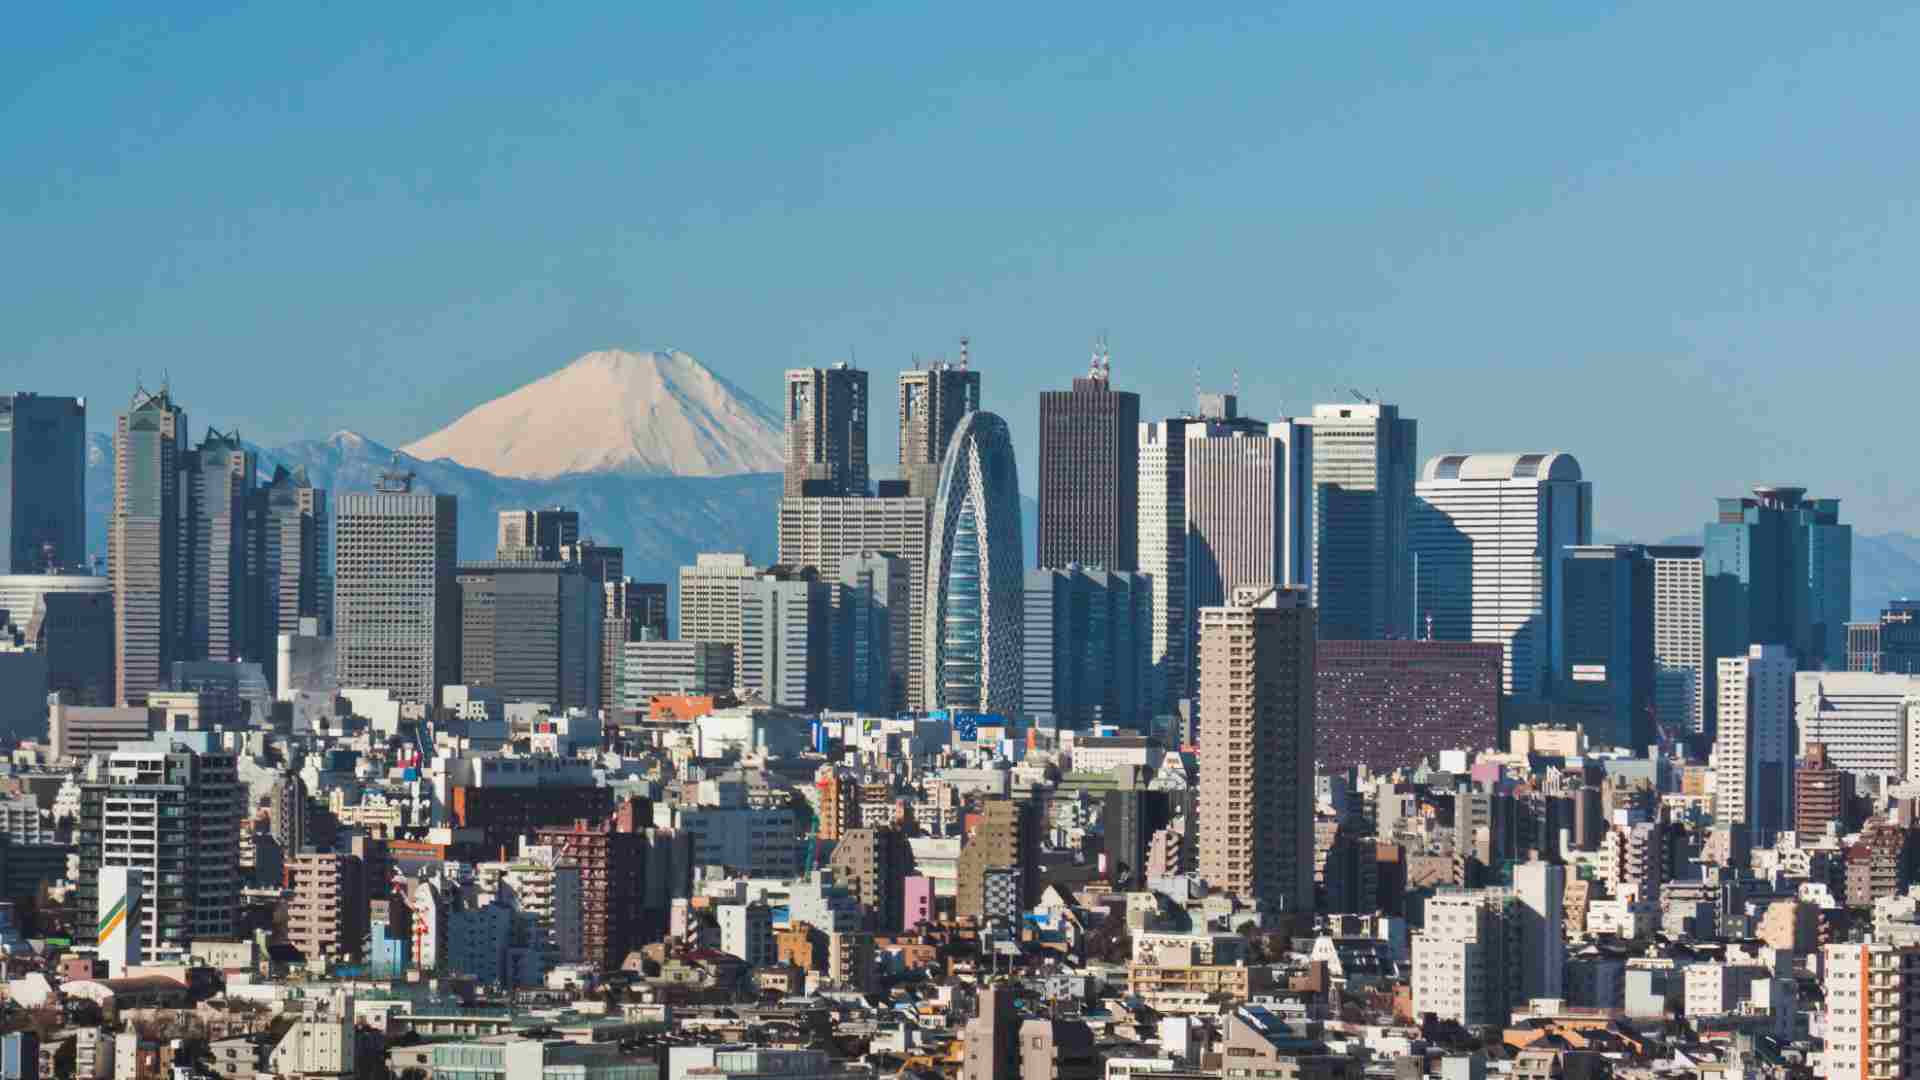 <p>Because of the natural elements and climate of Japan, the country is at risk of sinking in some places. For example, Tokyo has been experiencing sinking of land due to the compacting soil and consequences of intense weather conditions.   </p> <p>Cities have a large number of buildings, which are difficult to replace when the soil beneath them starts to become weak. Weakened foundations make it easy for heavy buildings to start sinking in the ground.  </p>